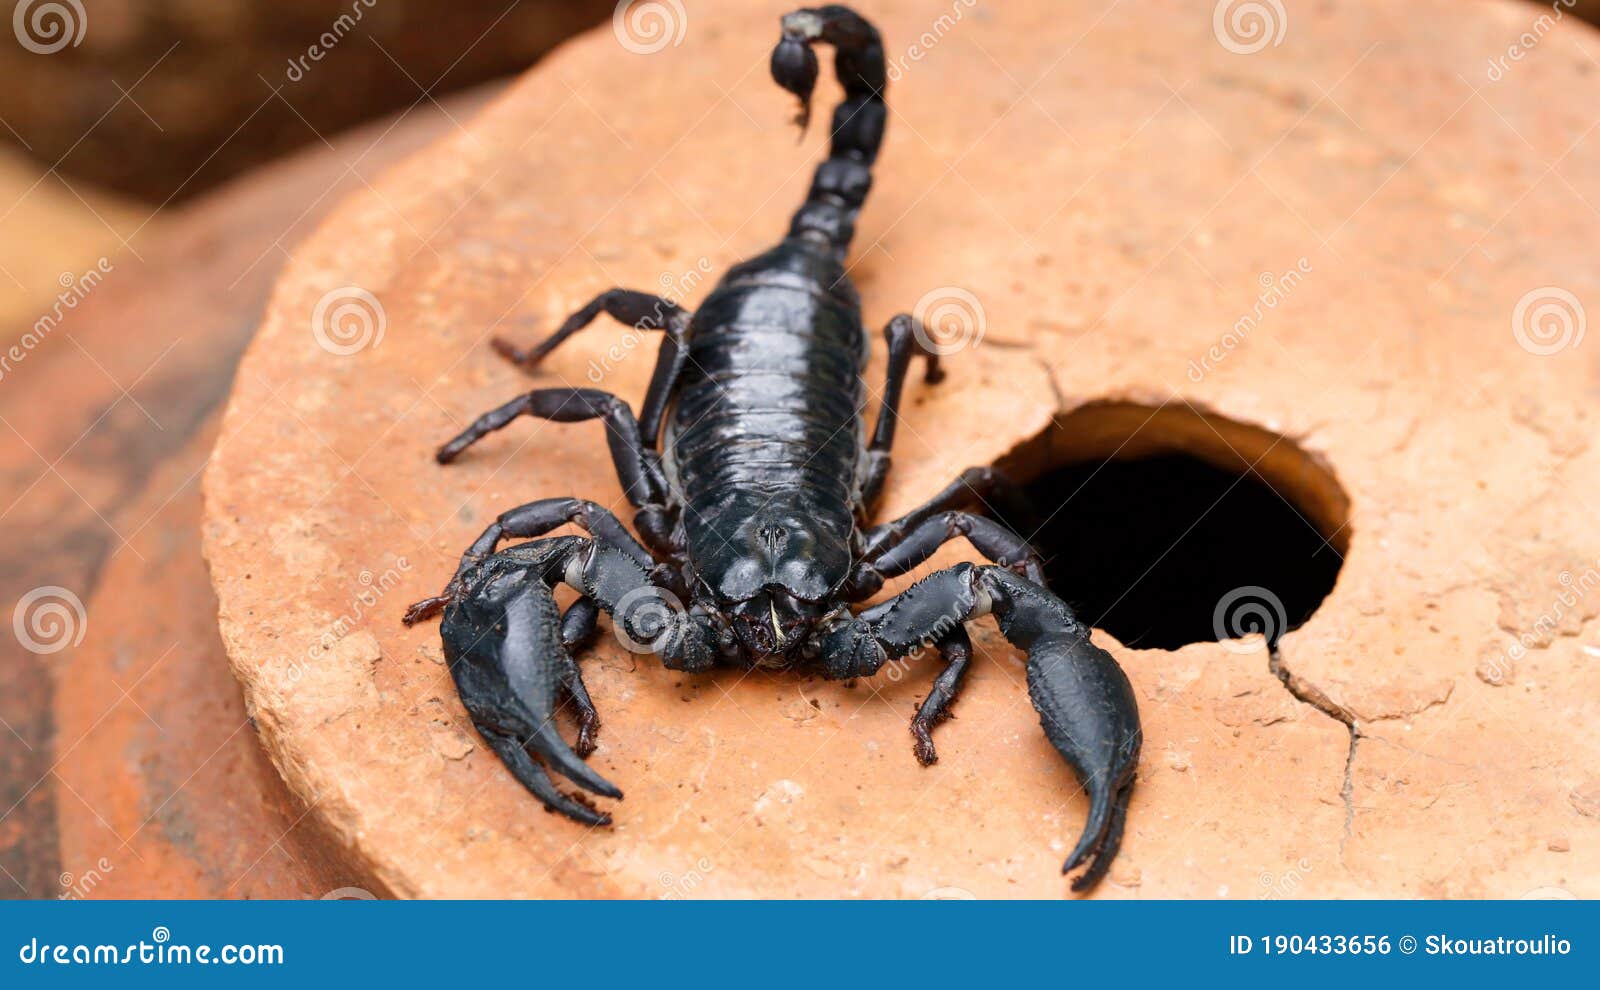 Black Scorpion Macro Photo, Dreaded Arachnid. Horrific Creature with a  Toxic Stinger Tail and Two Strong Claws for Protection. Stock Photo - Image  of poison, wildlife: 190433656